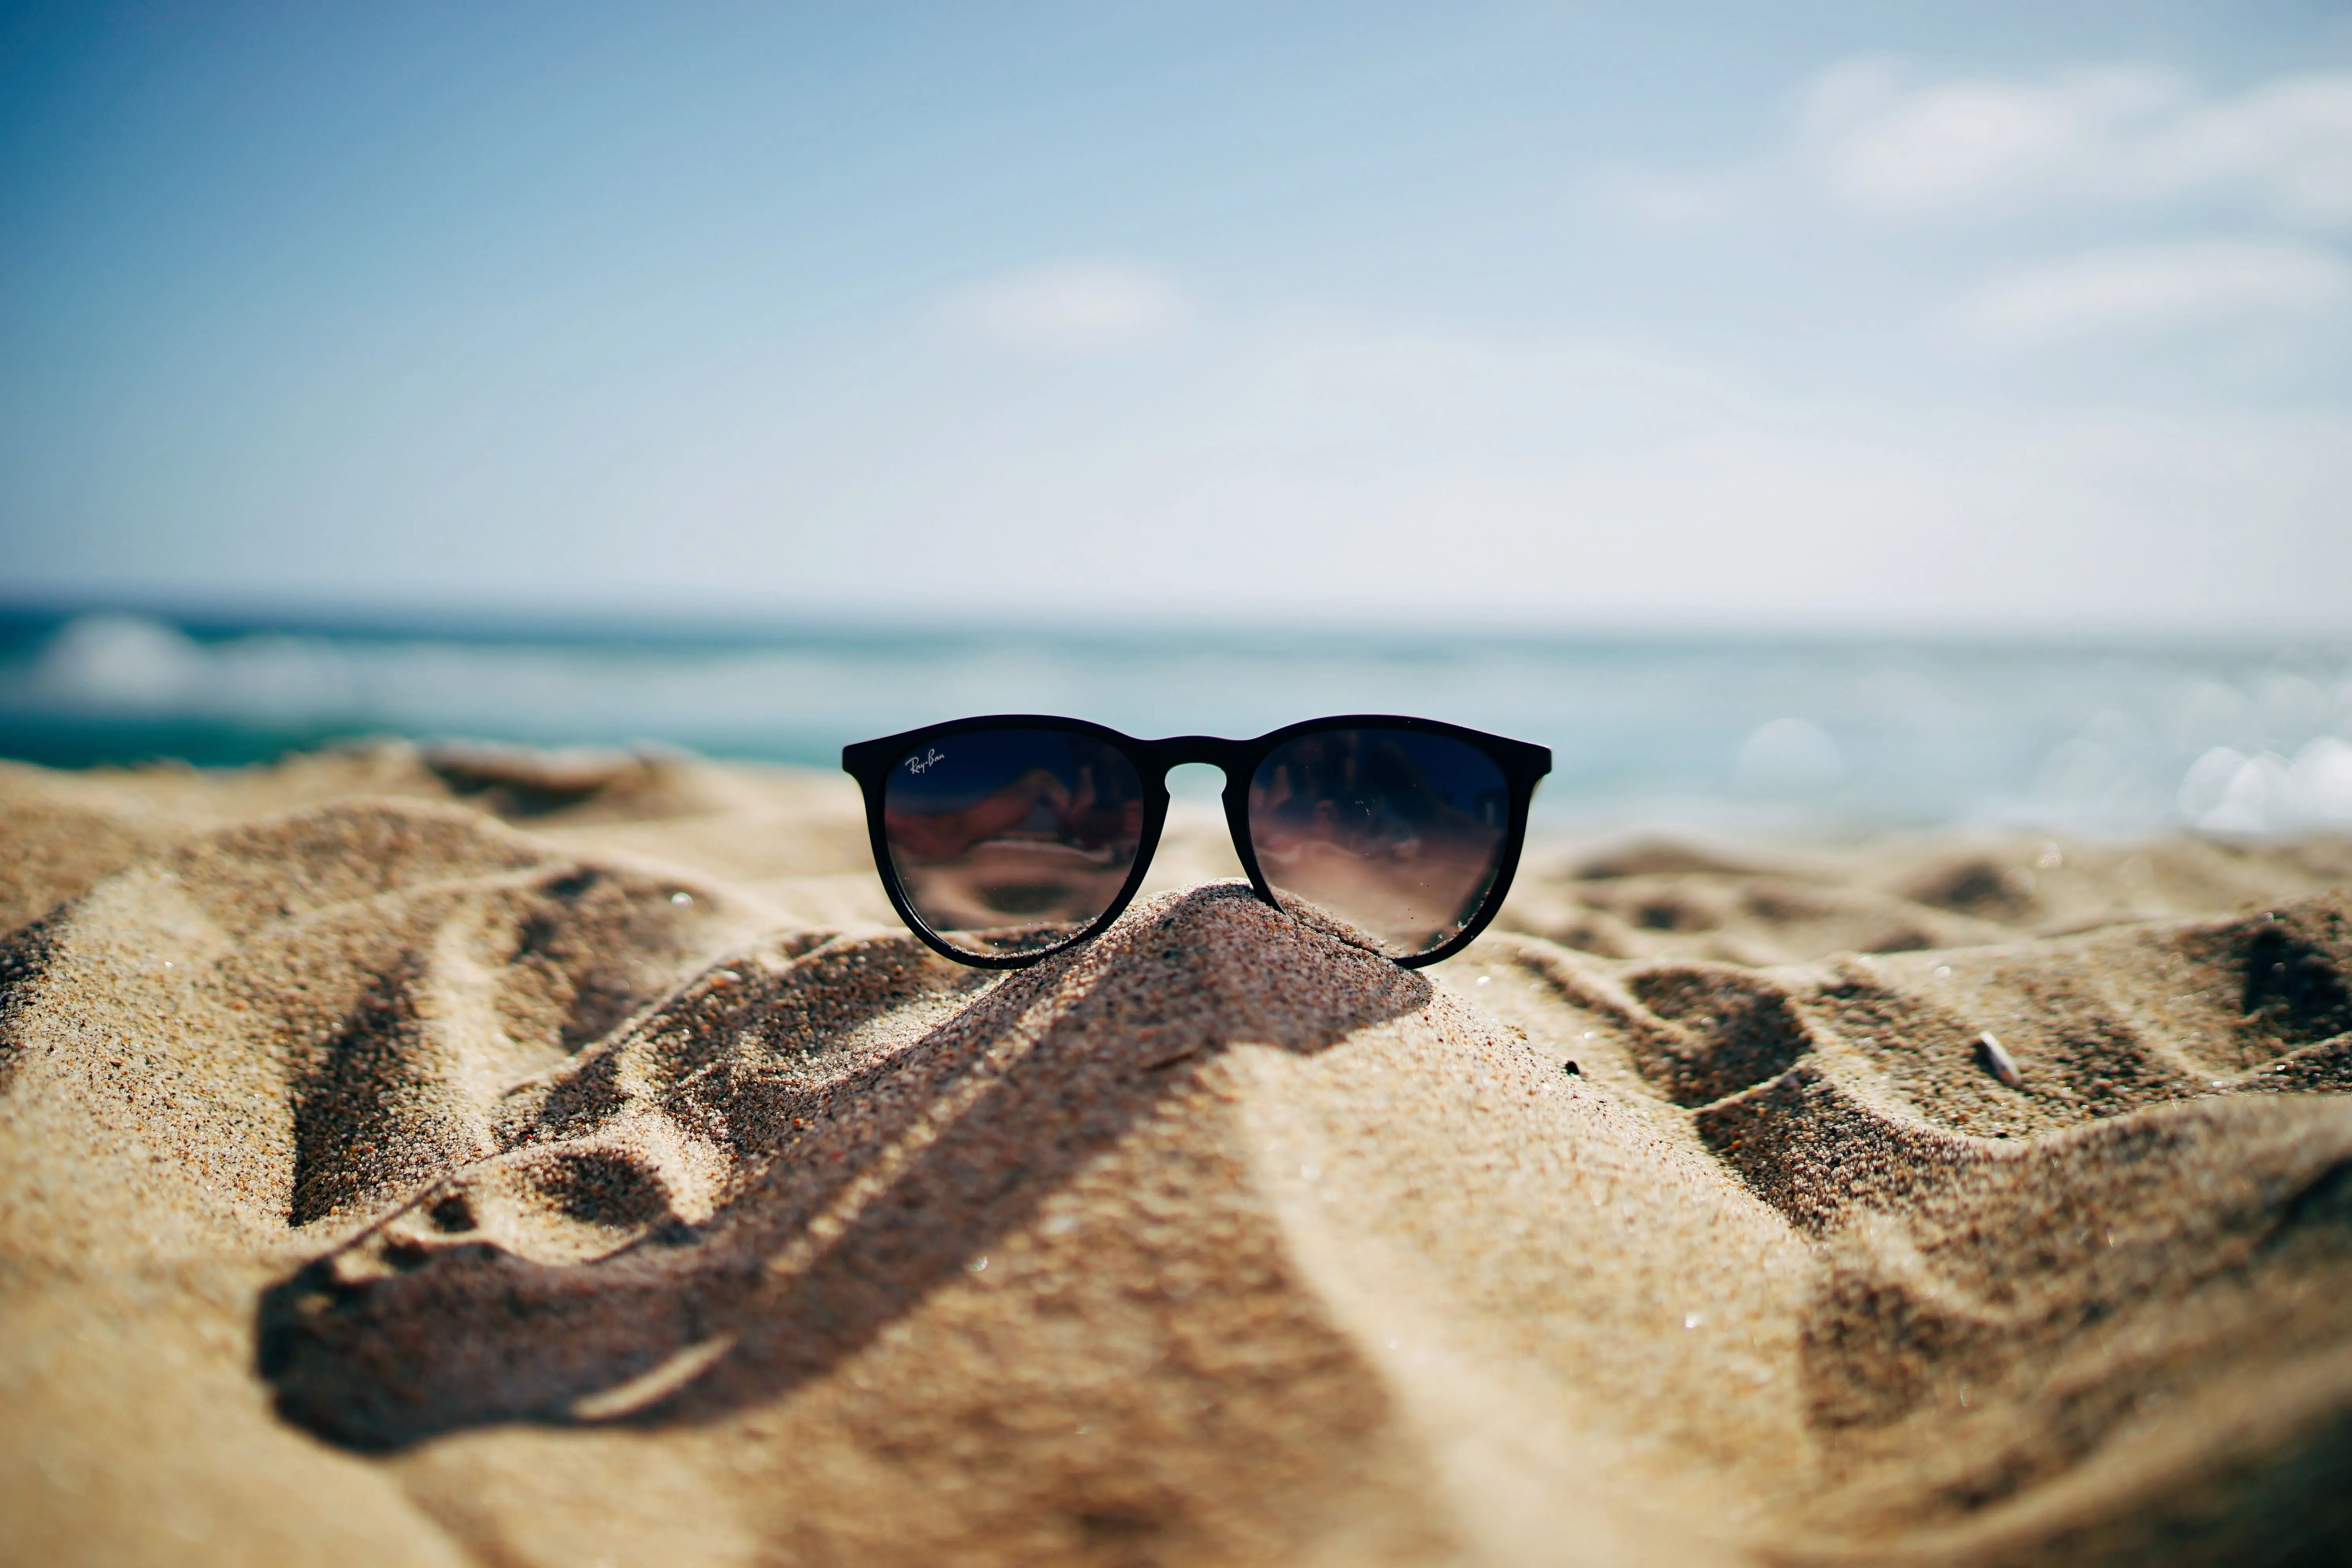 Why Is It Important To Wear Sunglasses?